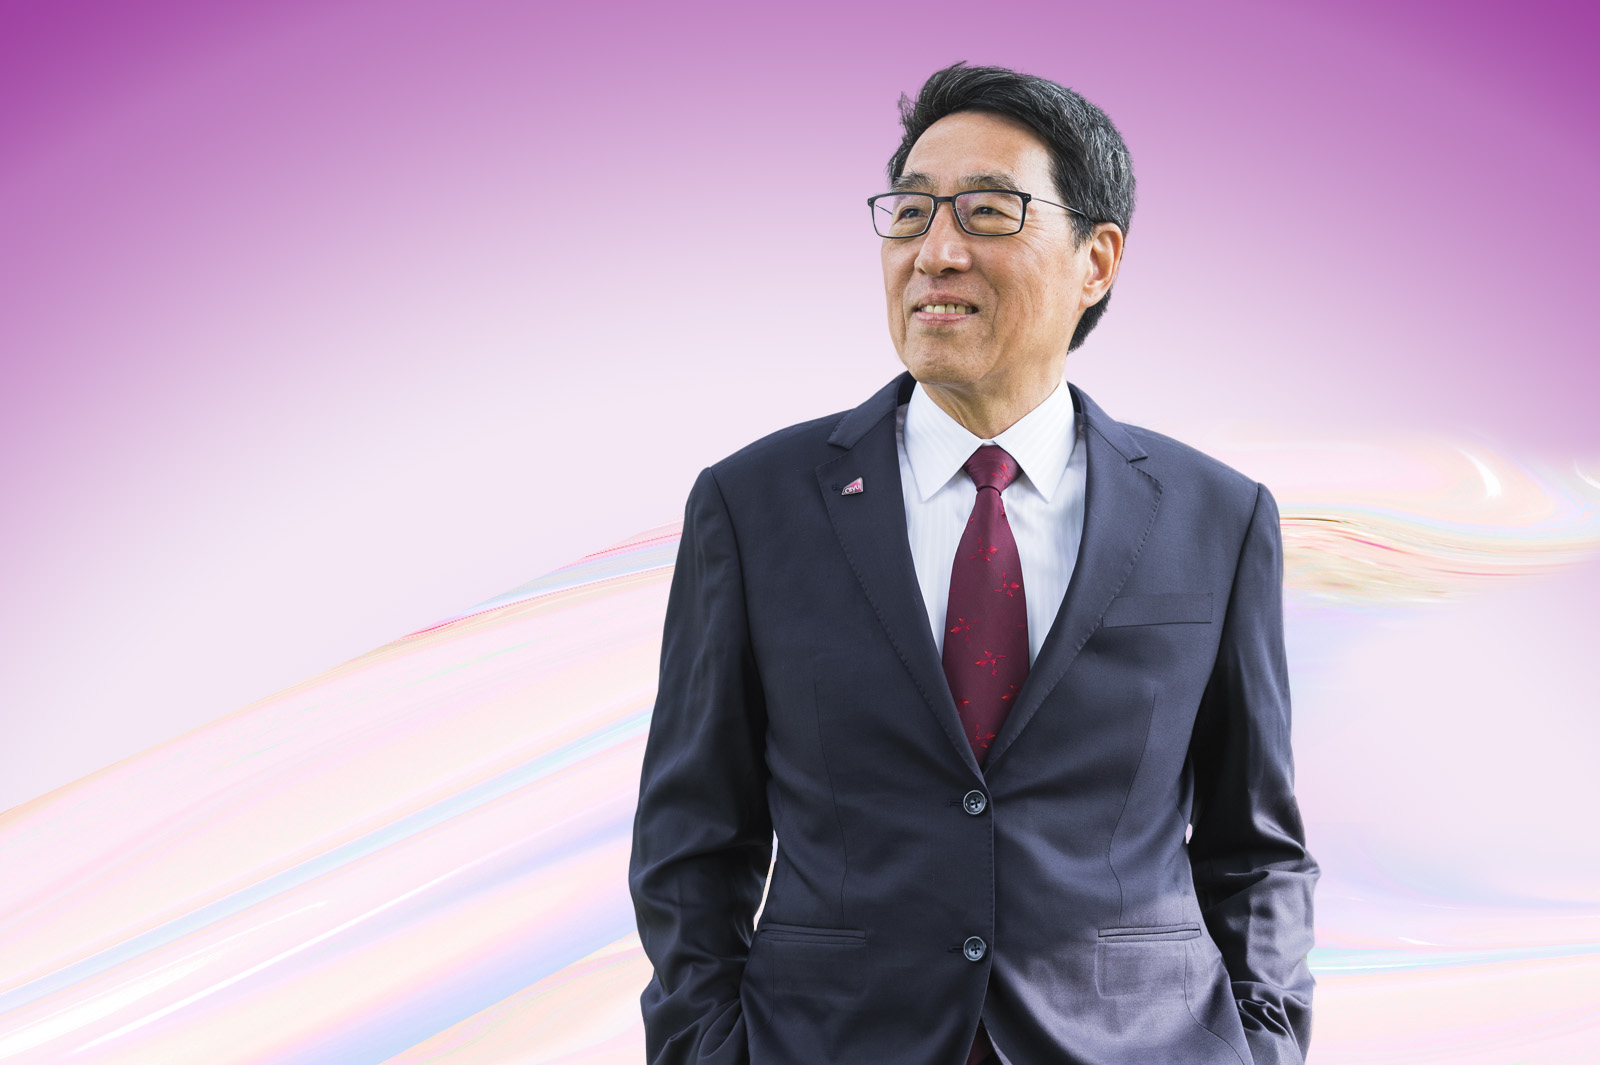 President Way Kuo elected International Fellow of Canadian Academy of Engineering